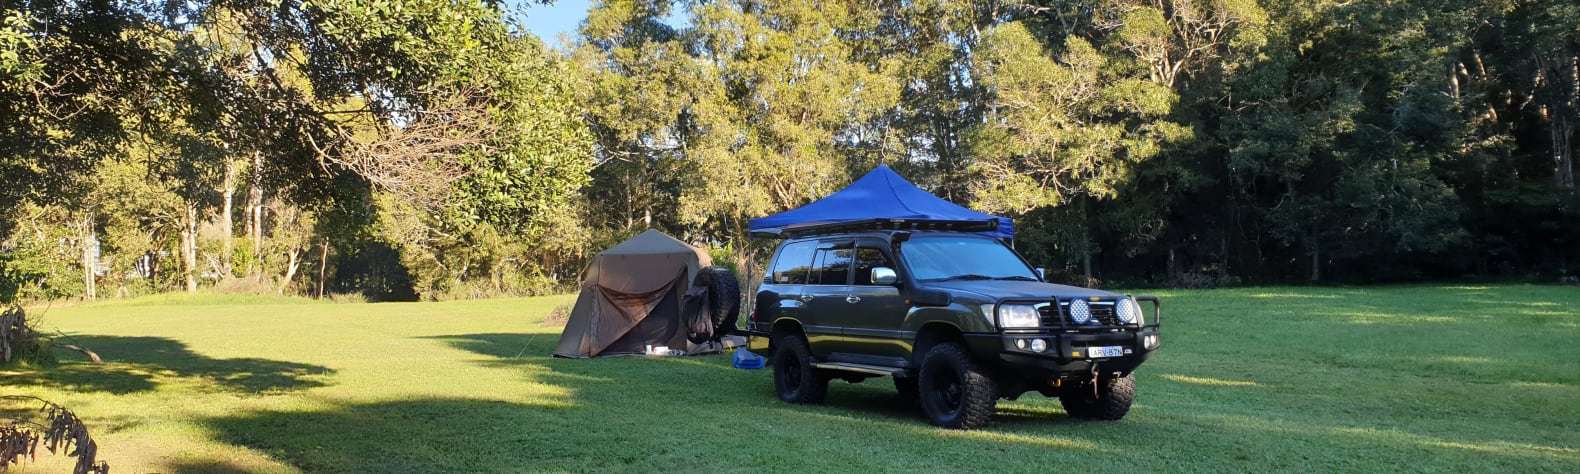 "Erinvale" Camping by a Billabong